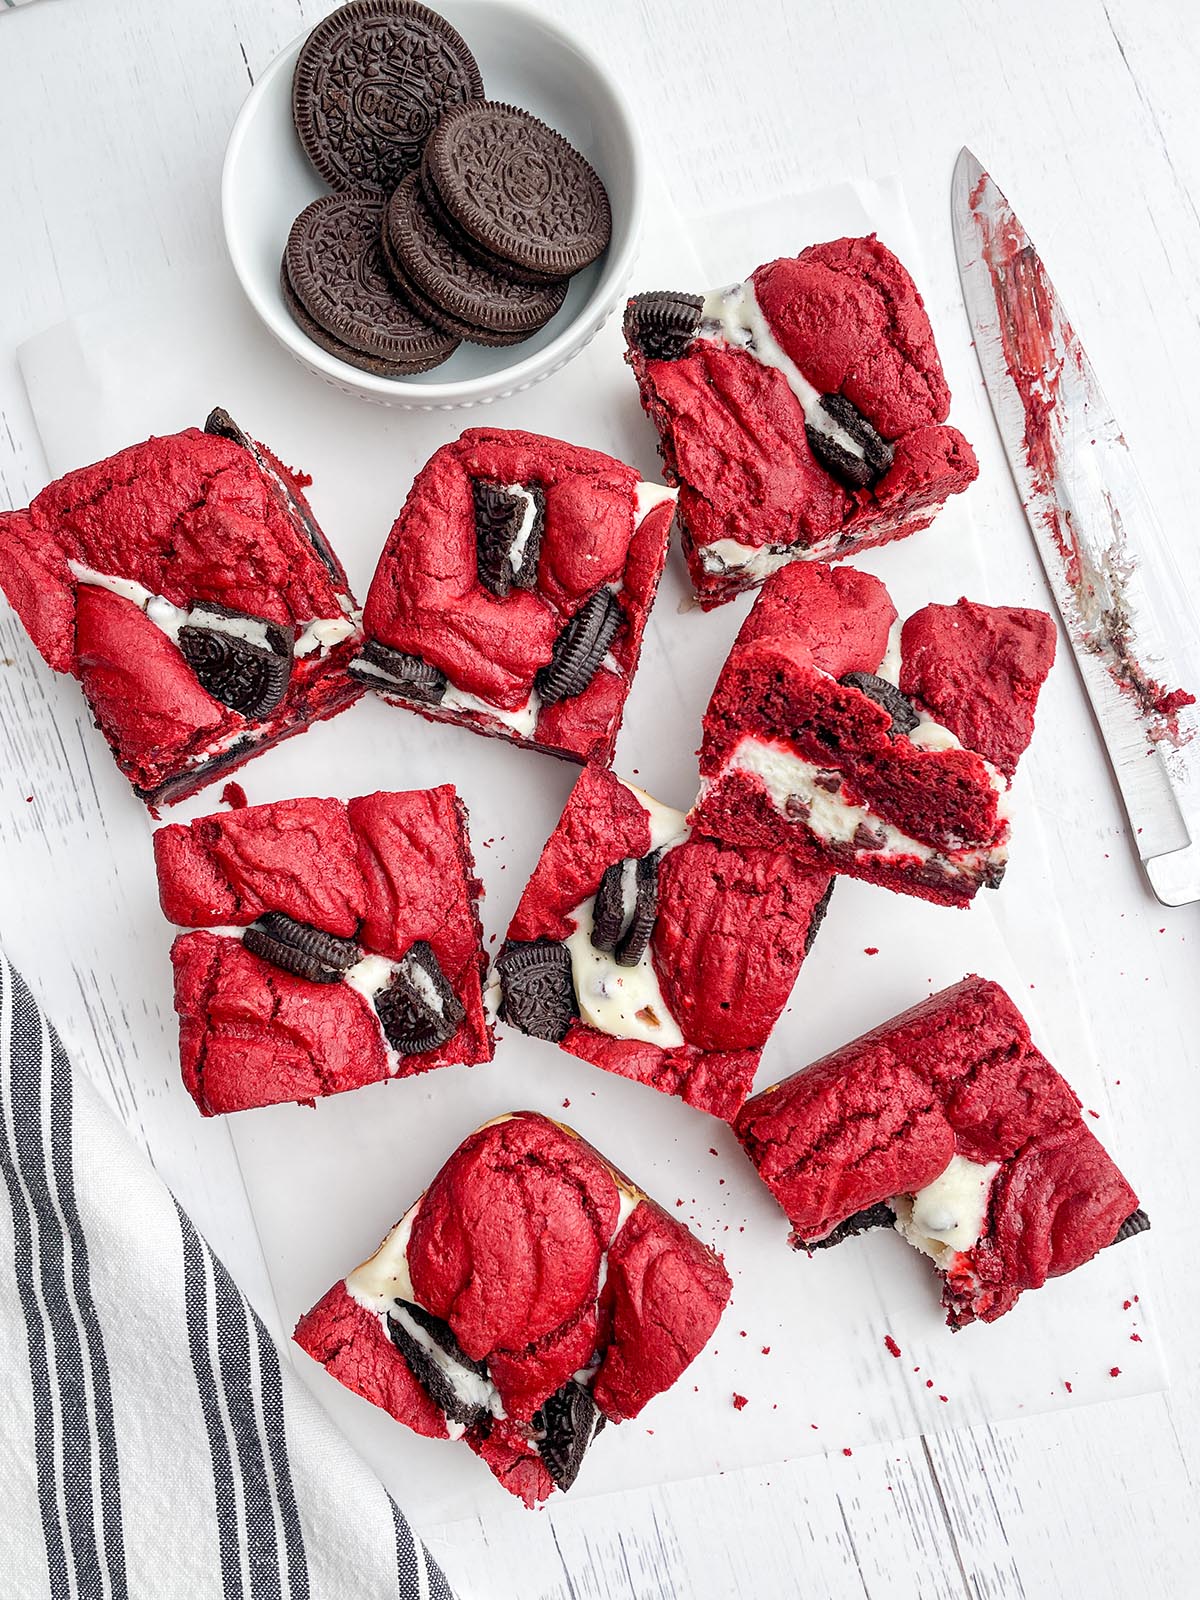 red velvet brownie squares on parchment paper next to a bowl of Oreos, a knife and a black and white napkin.